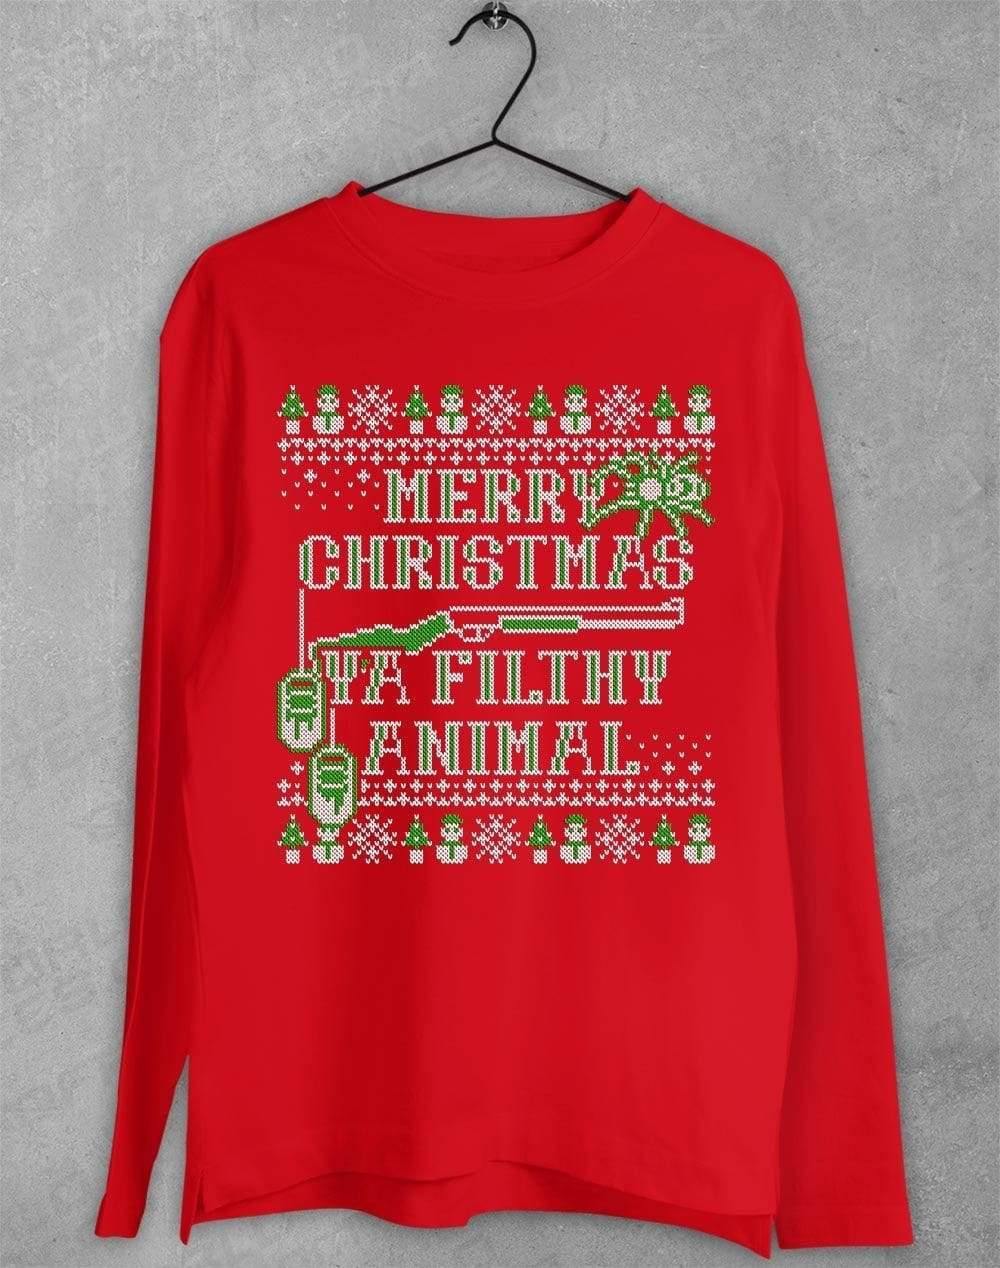 Merry Christmas Ya Filthy Animal Festive Knitted-Look Long Sleeve T-Shirt S / Red  - Off World Tees